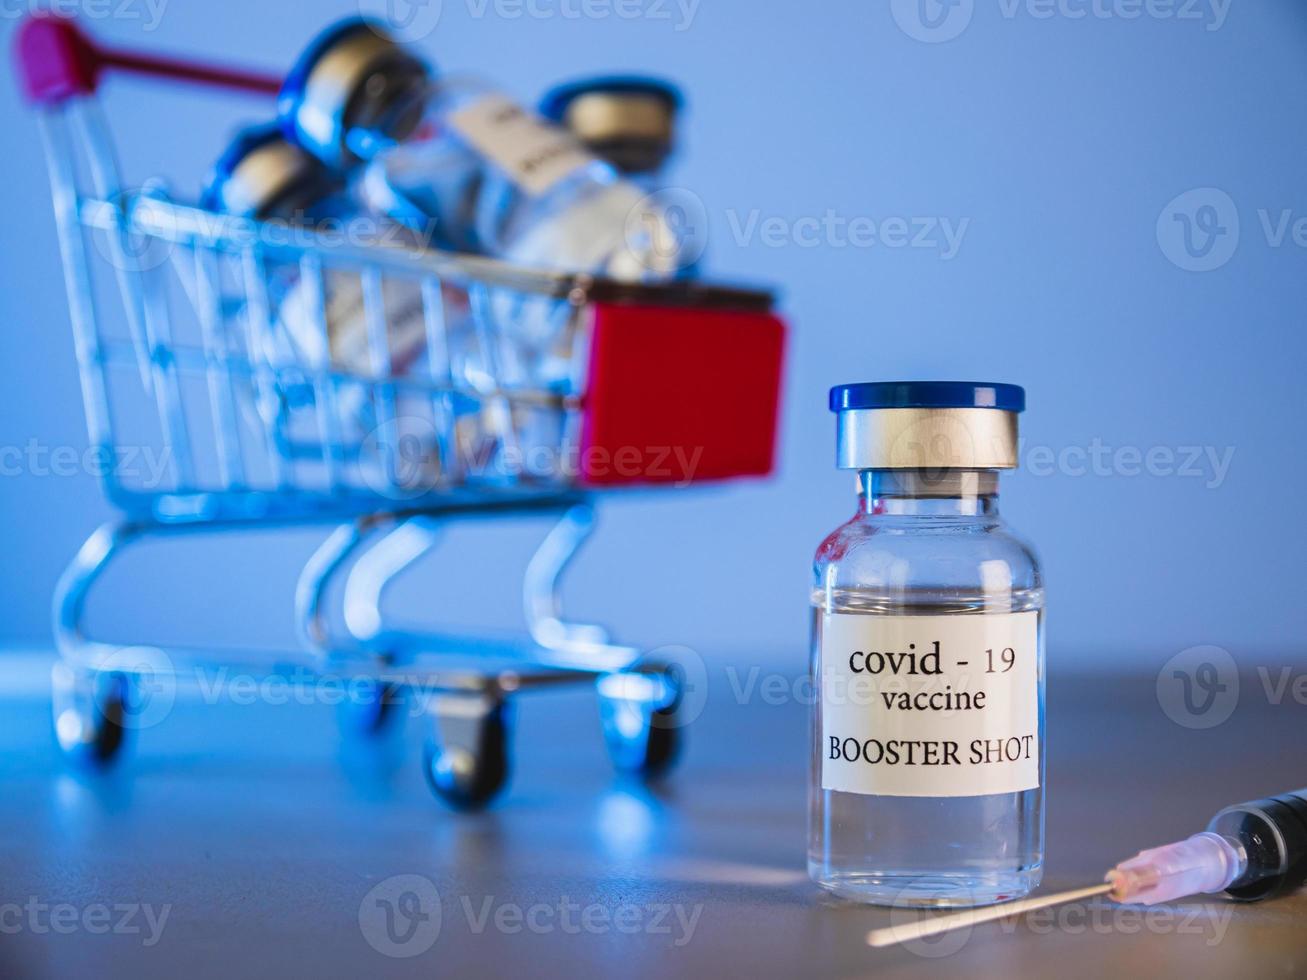 COVID-19 booster vaccine vials in shopping cart. Medicine and health care concept photo